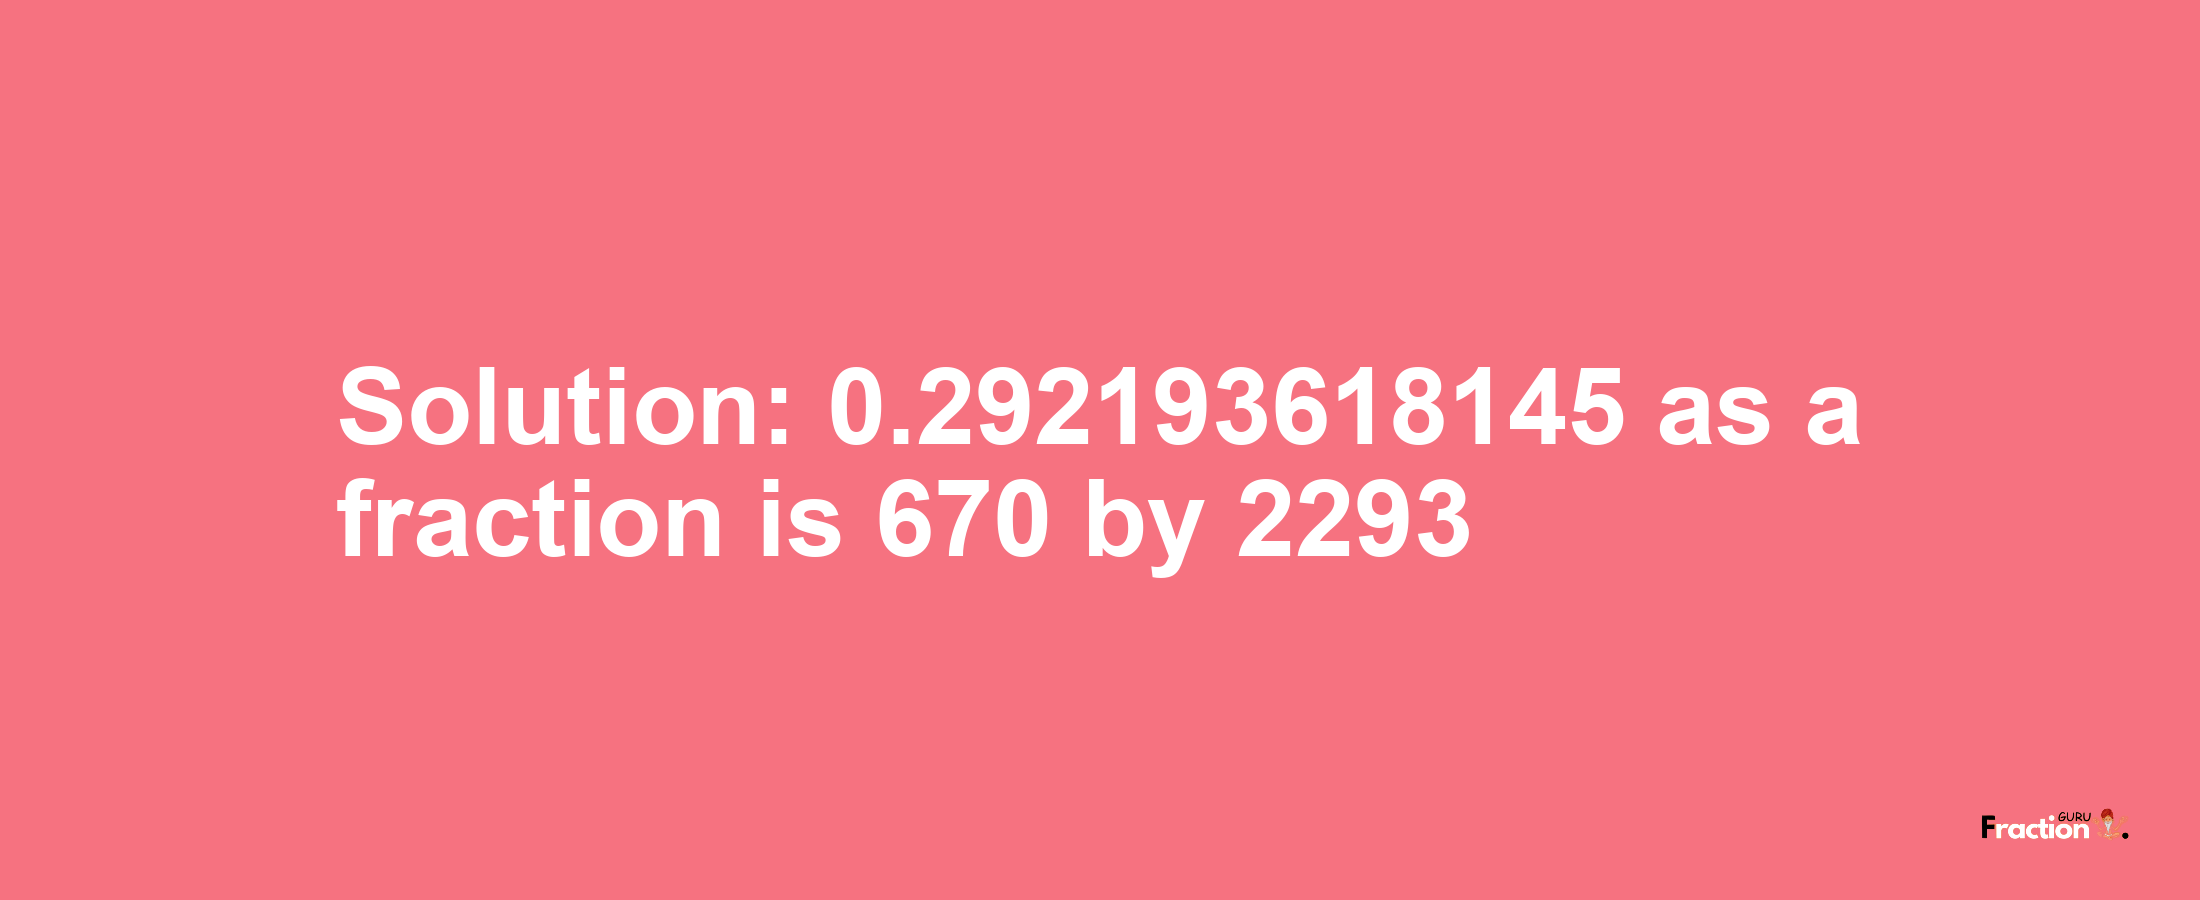 Solution:0.292193618145 as a fraction is 670/2293